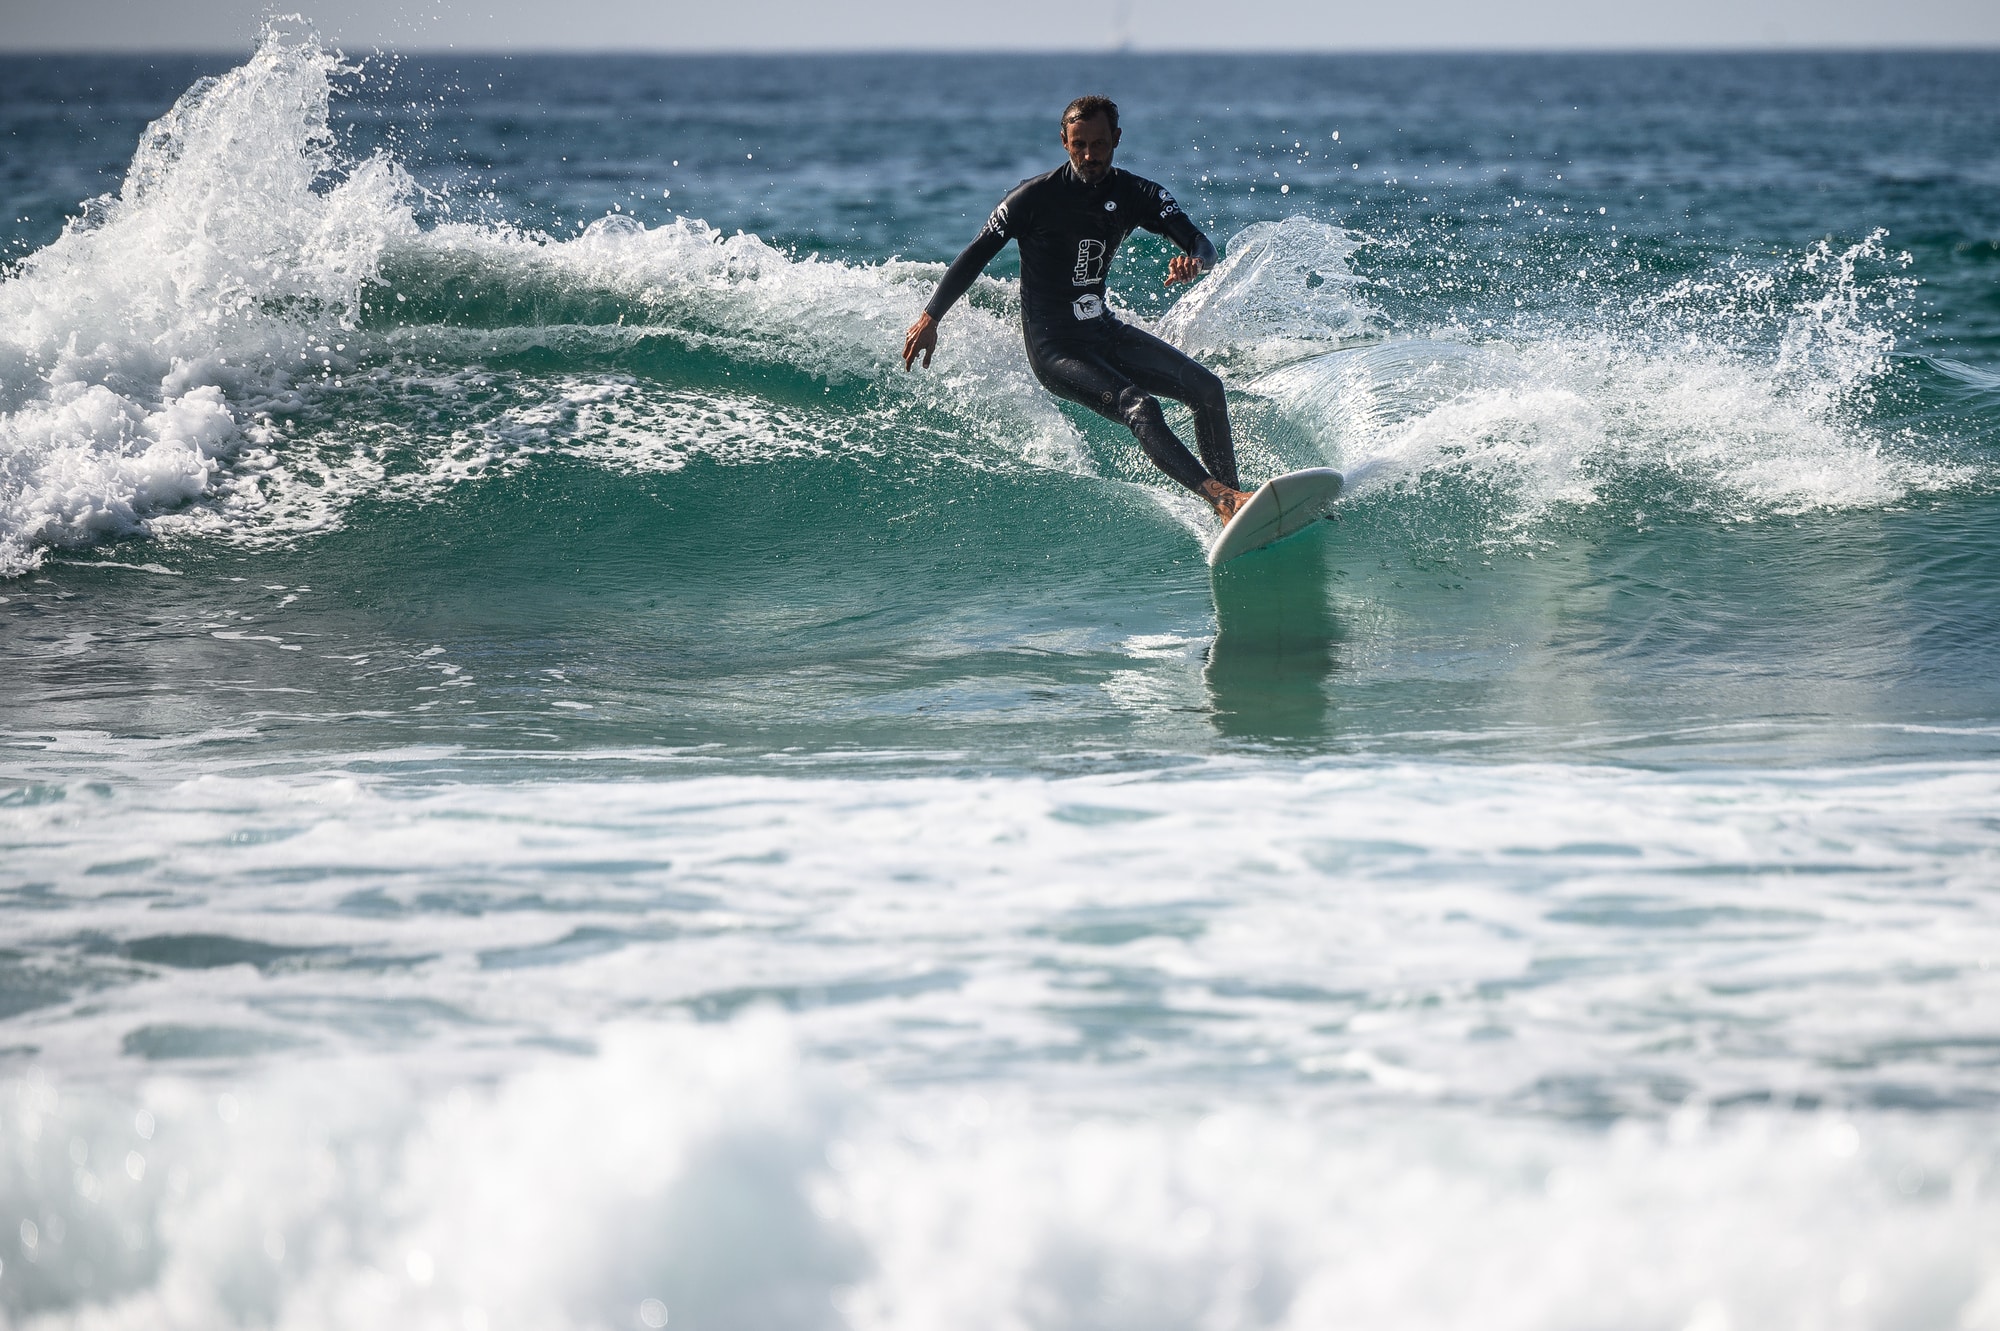 The fascinating physics of surfing!